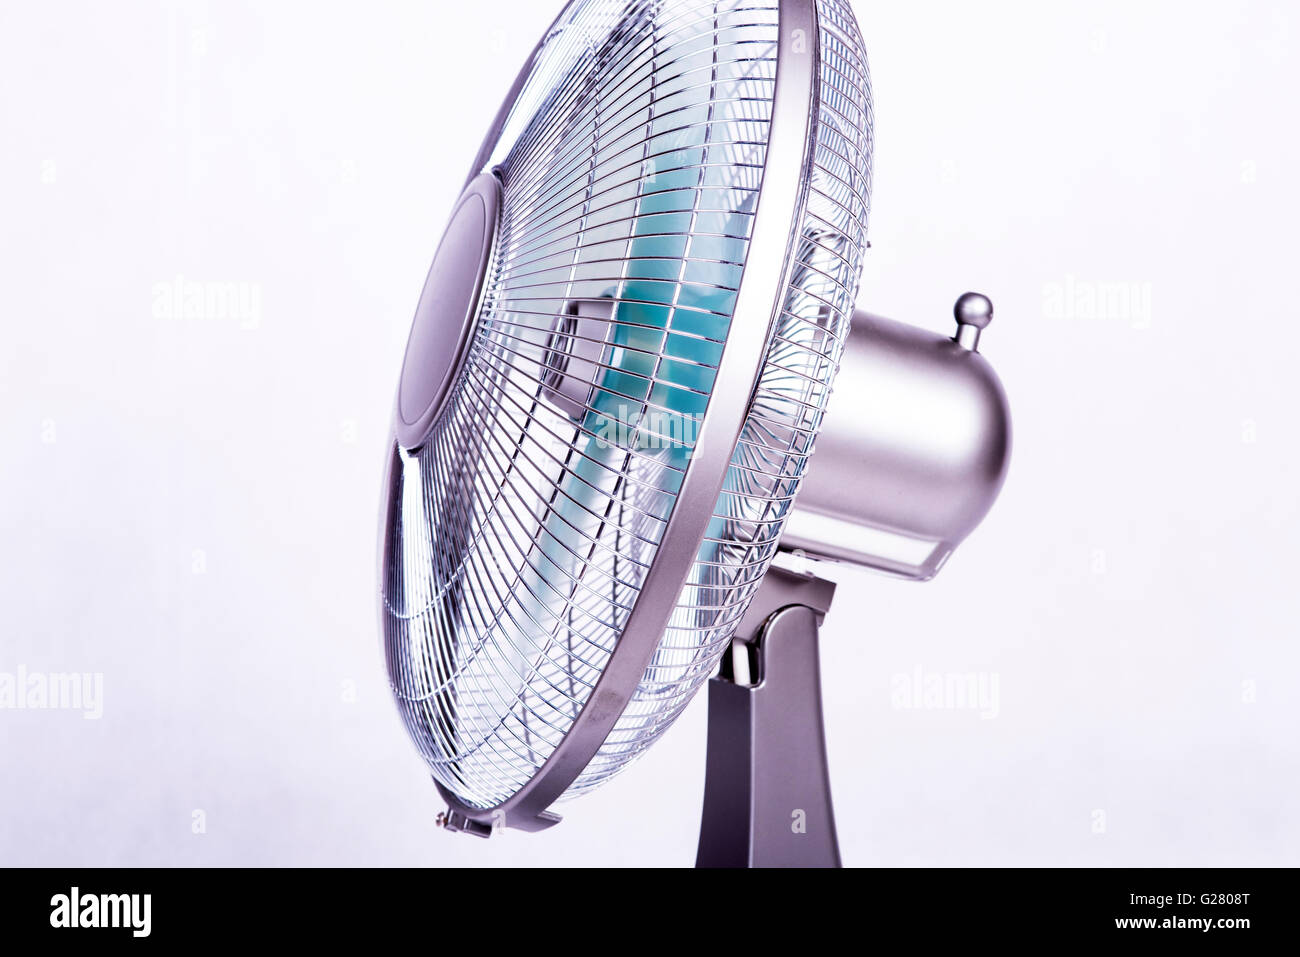 photo showing the fan on a white background Stock Photo